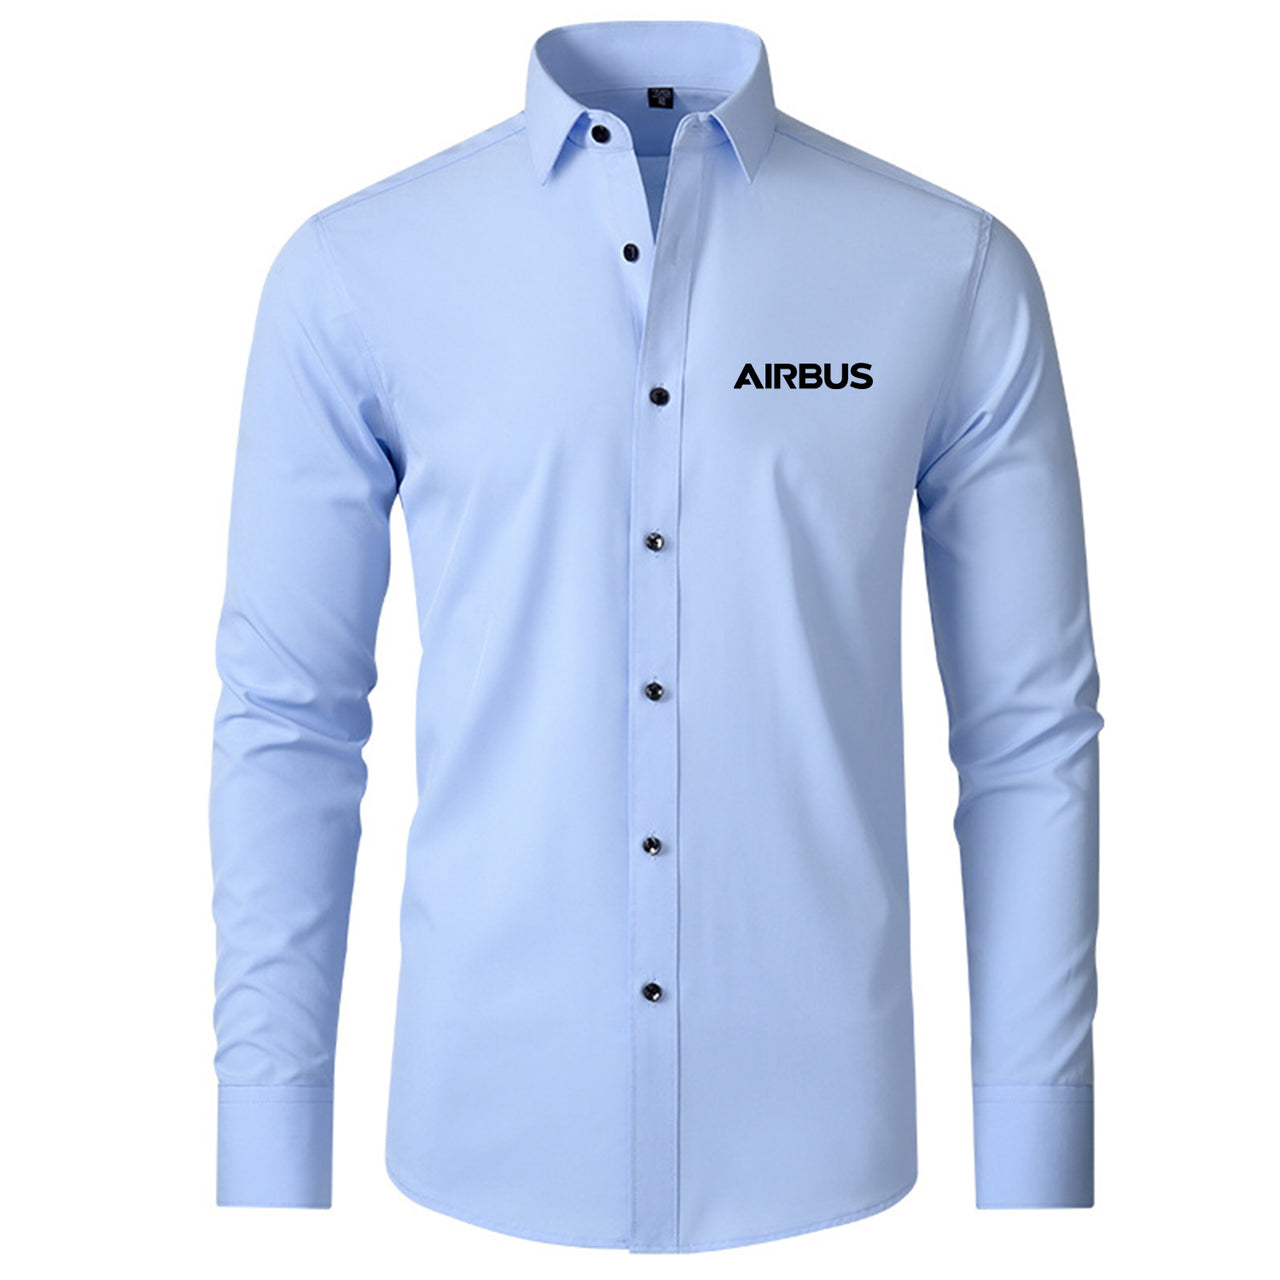 Airbus & Text Designed Long Sleeve Shirts